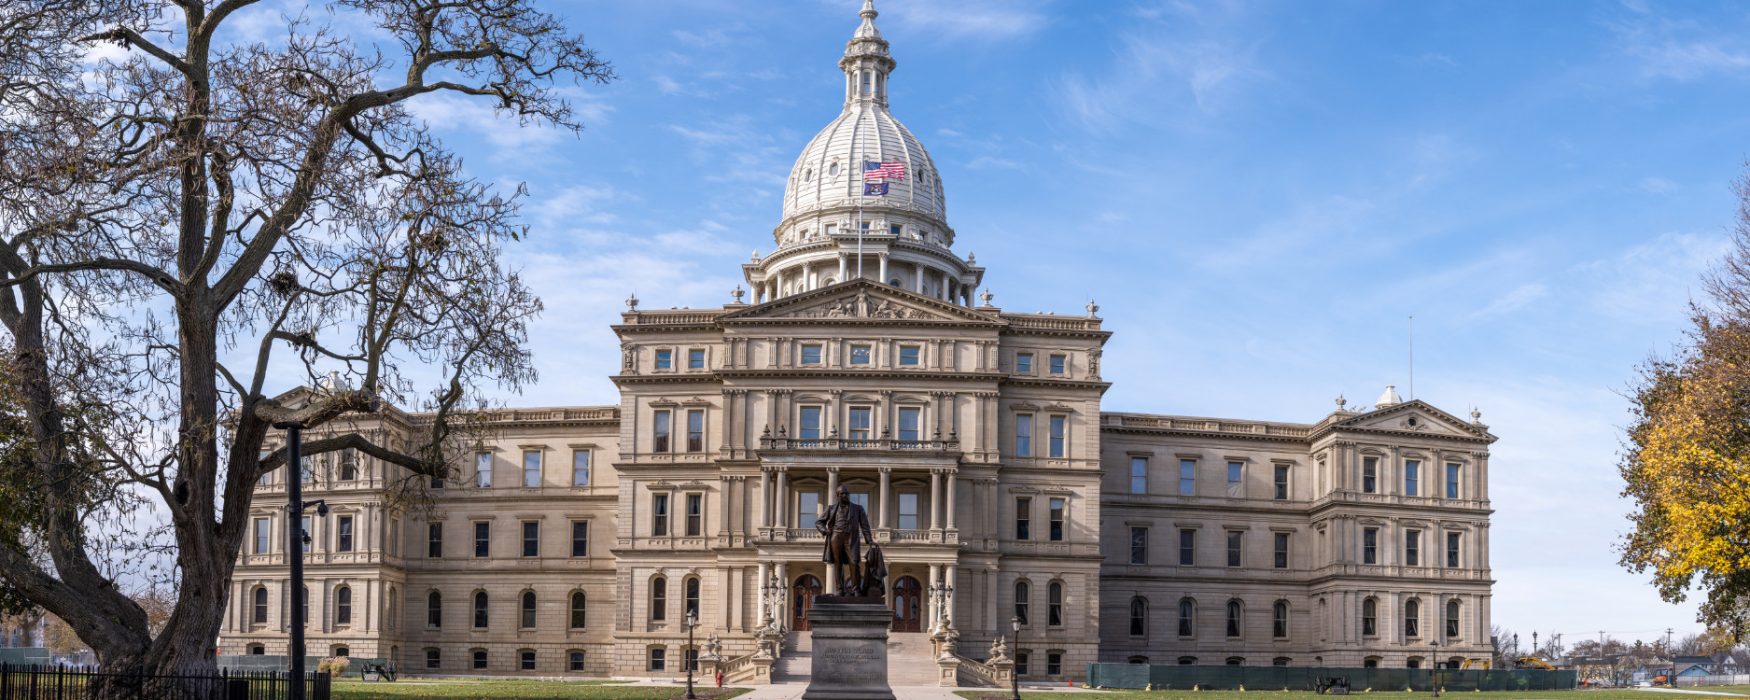 Image of Michigan's capitol building in Lansing